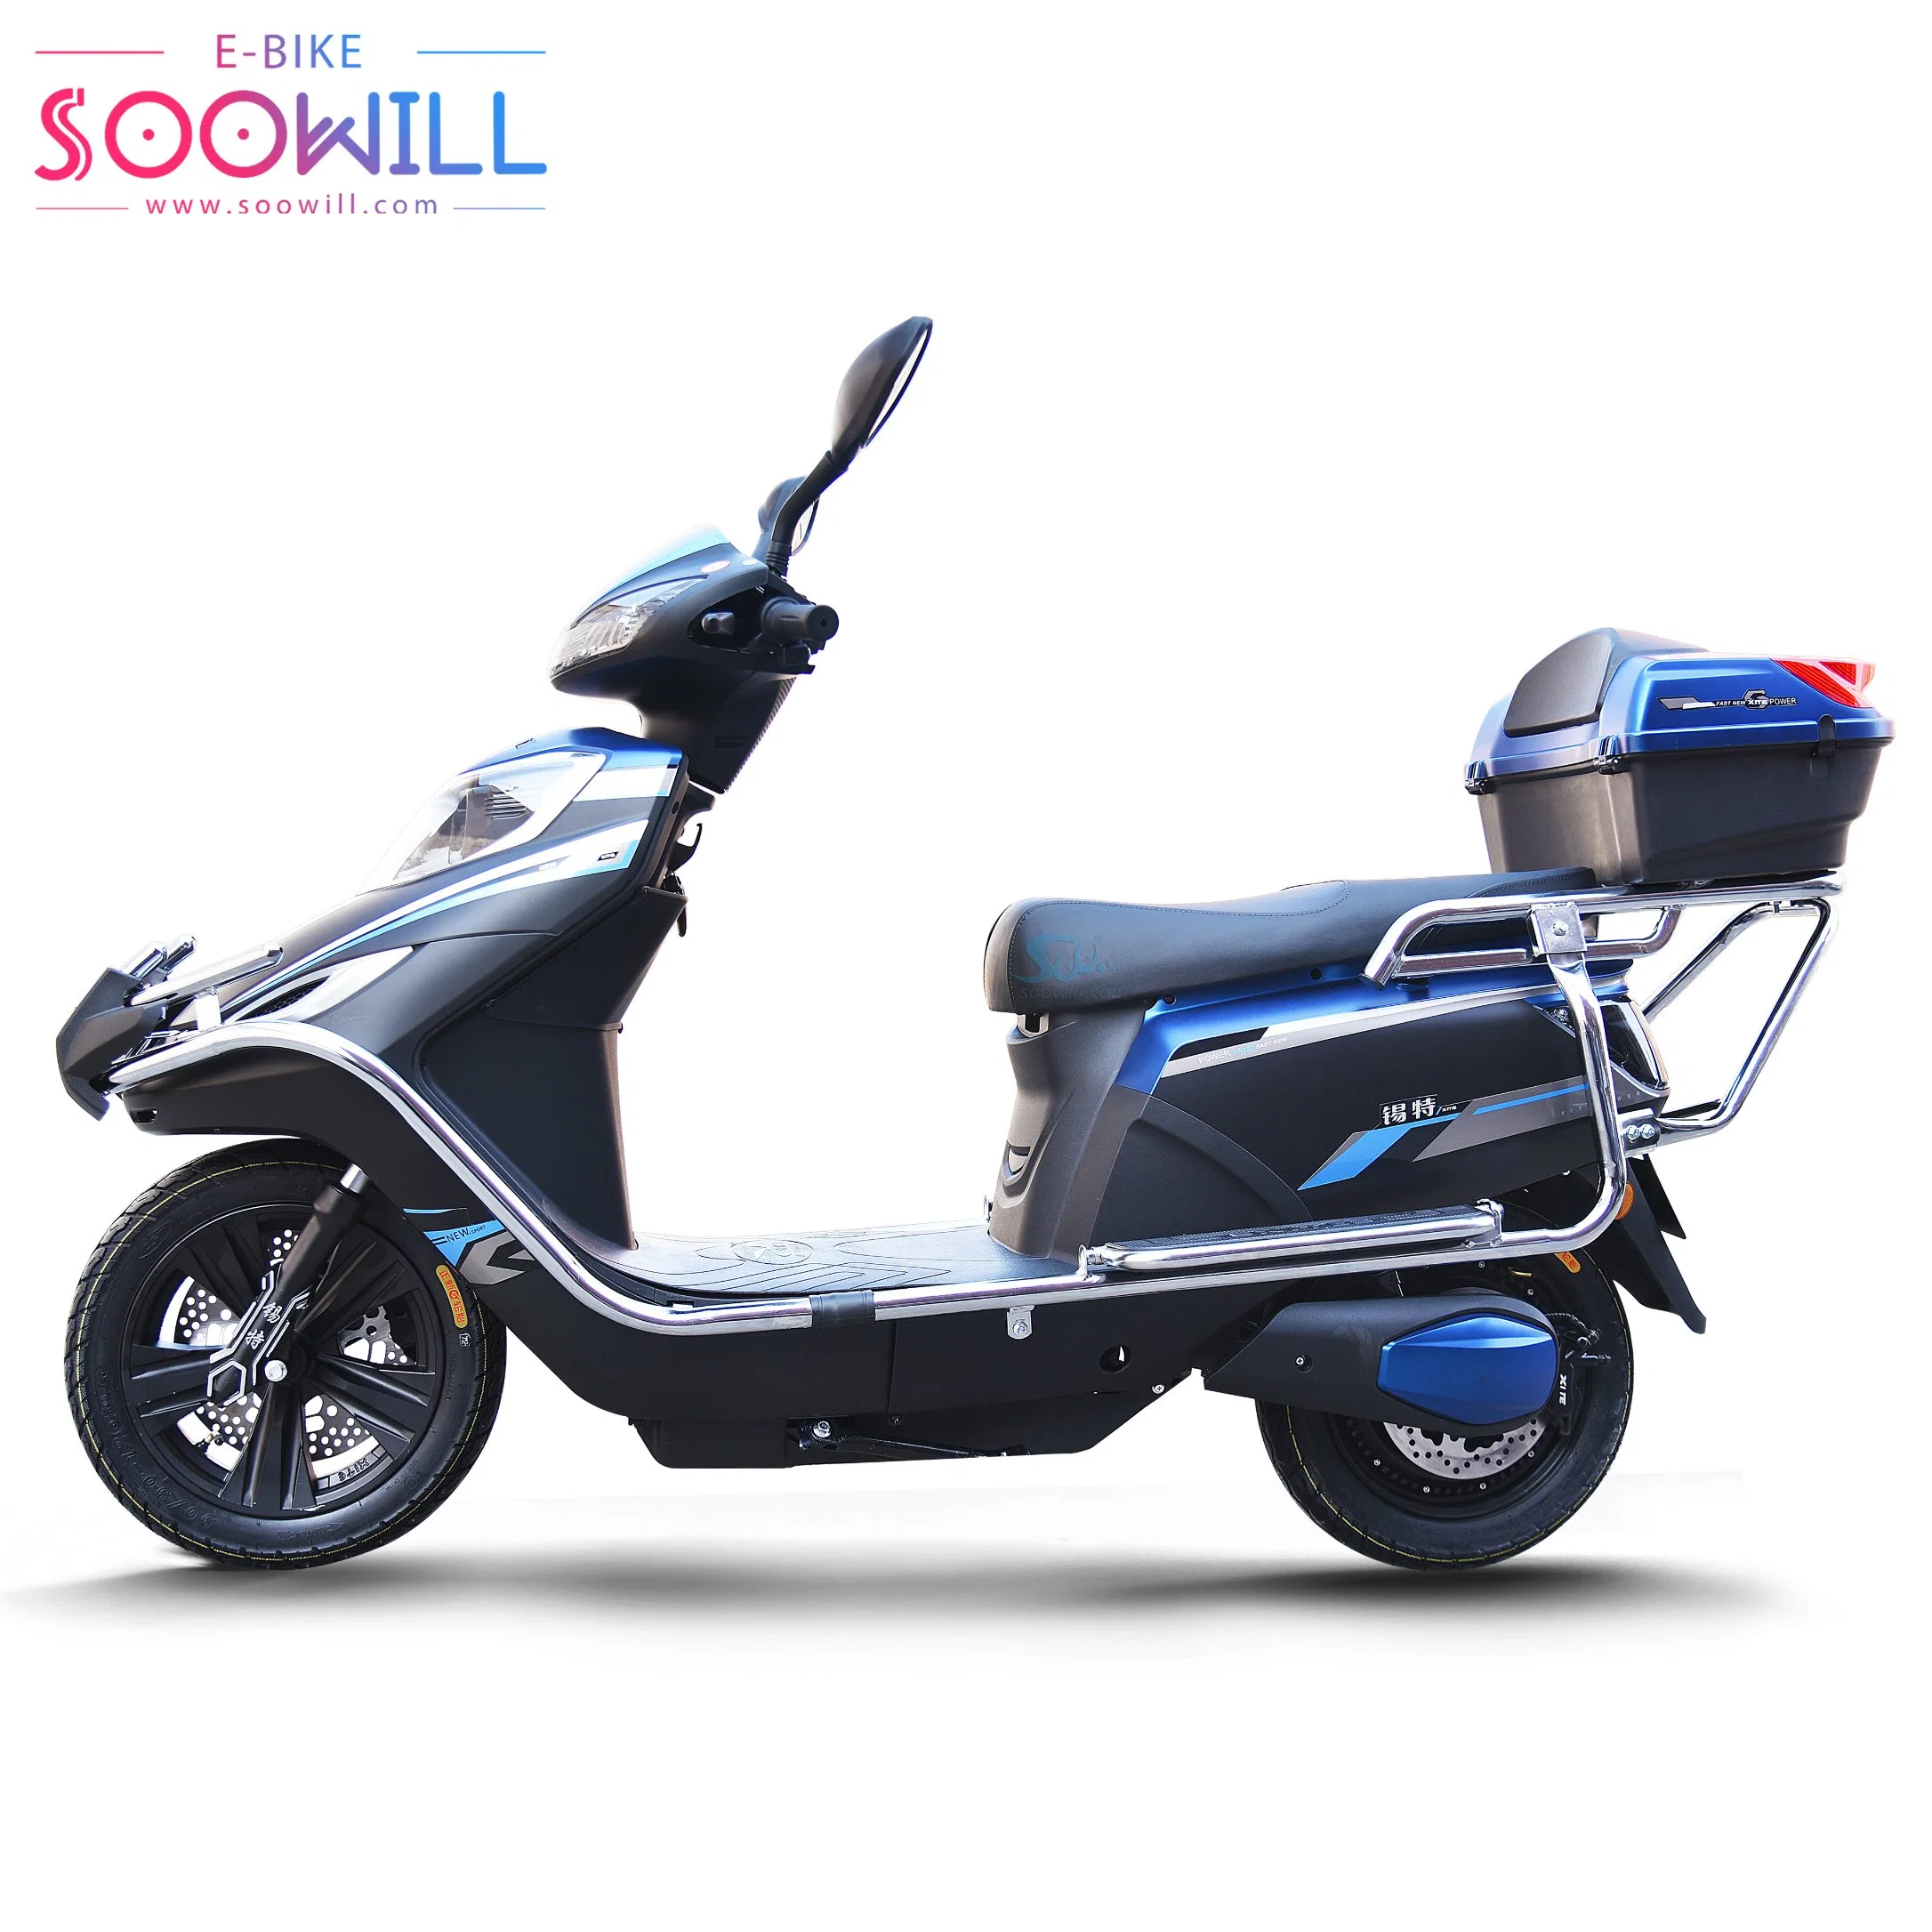 1200W Brush-Less DC Motor Ebike 72V32ah Lead-Acid Battery Electric Mobility Scooter Motorcycle